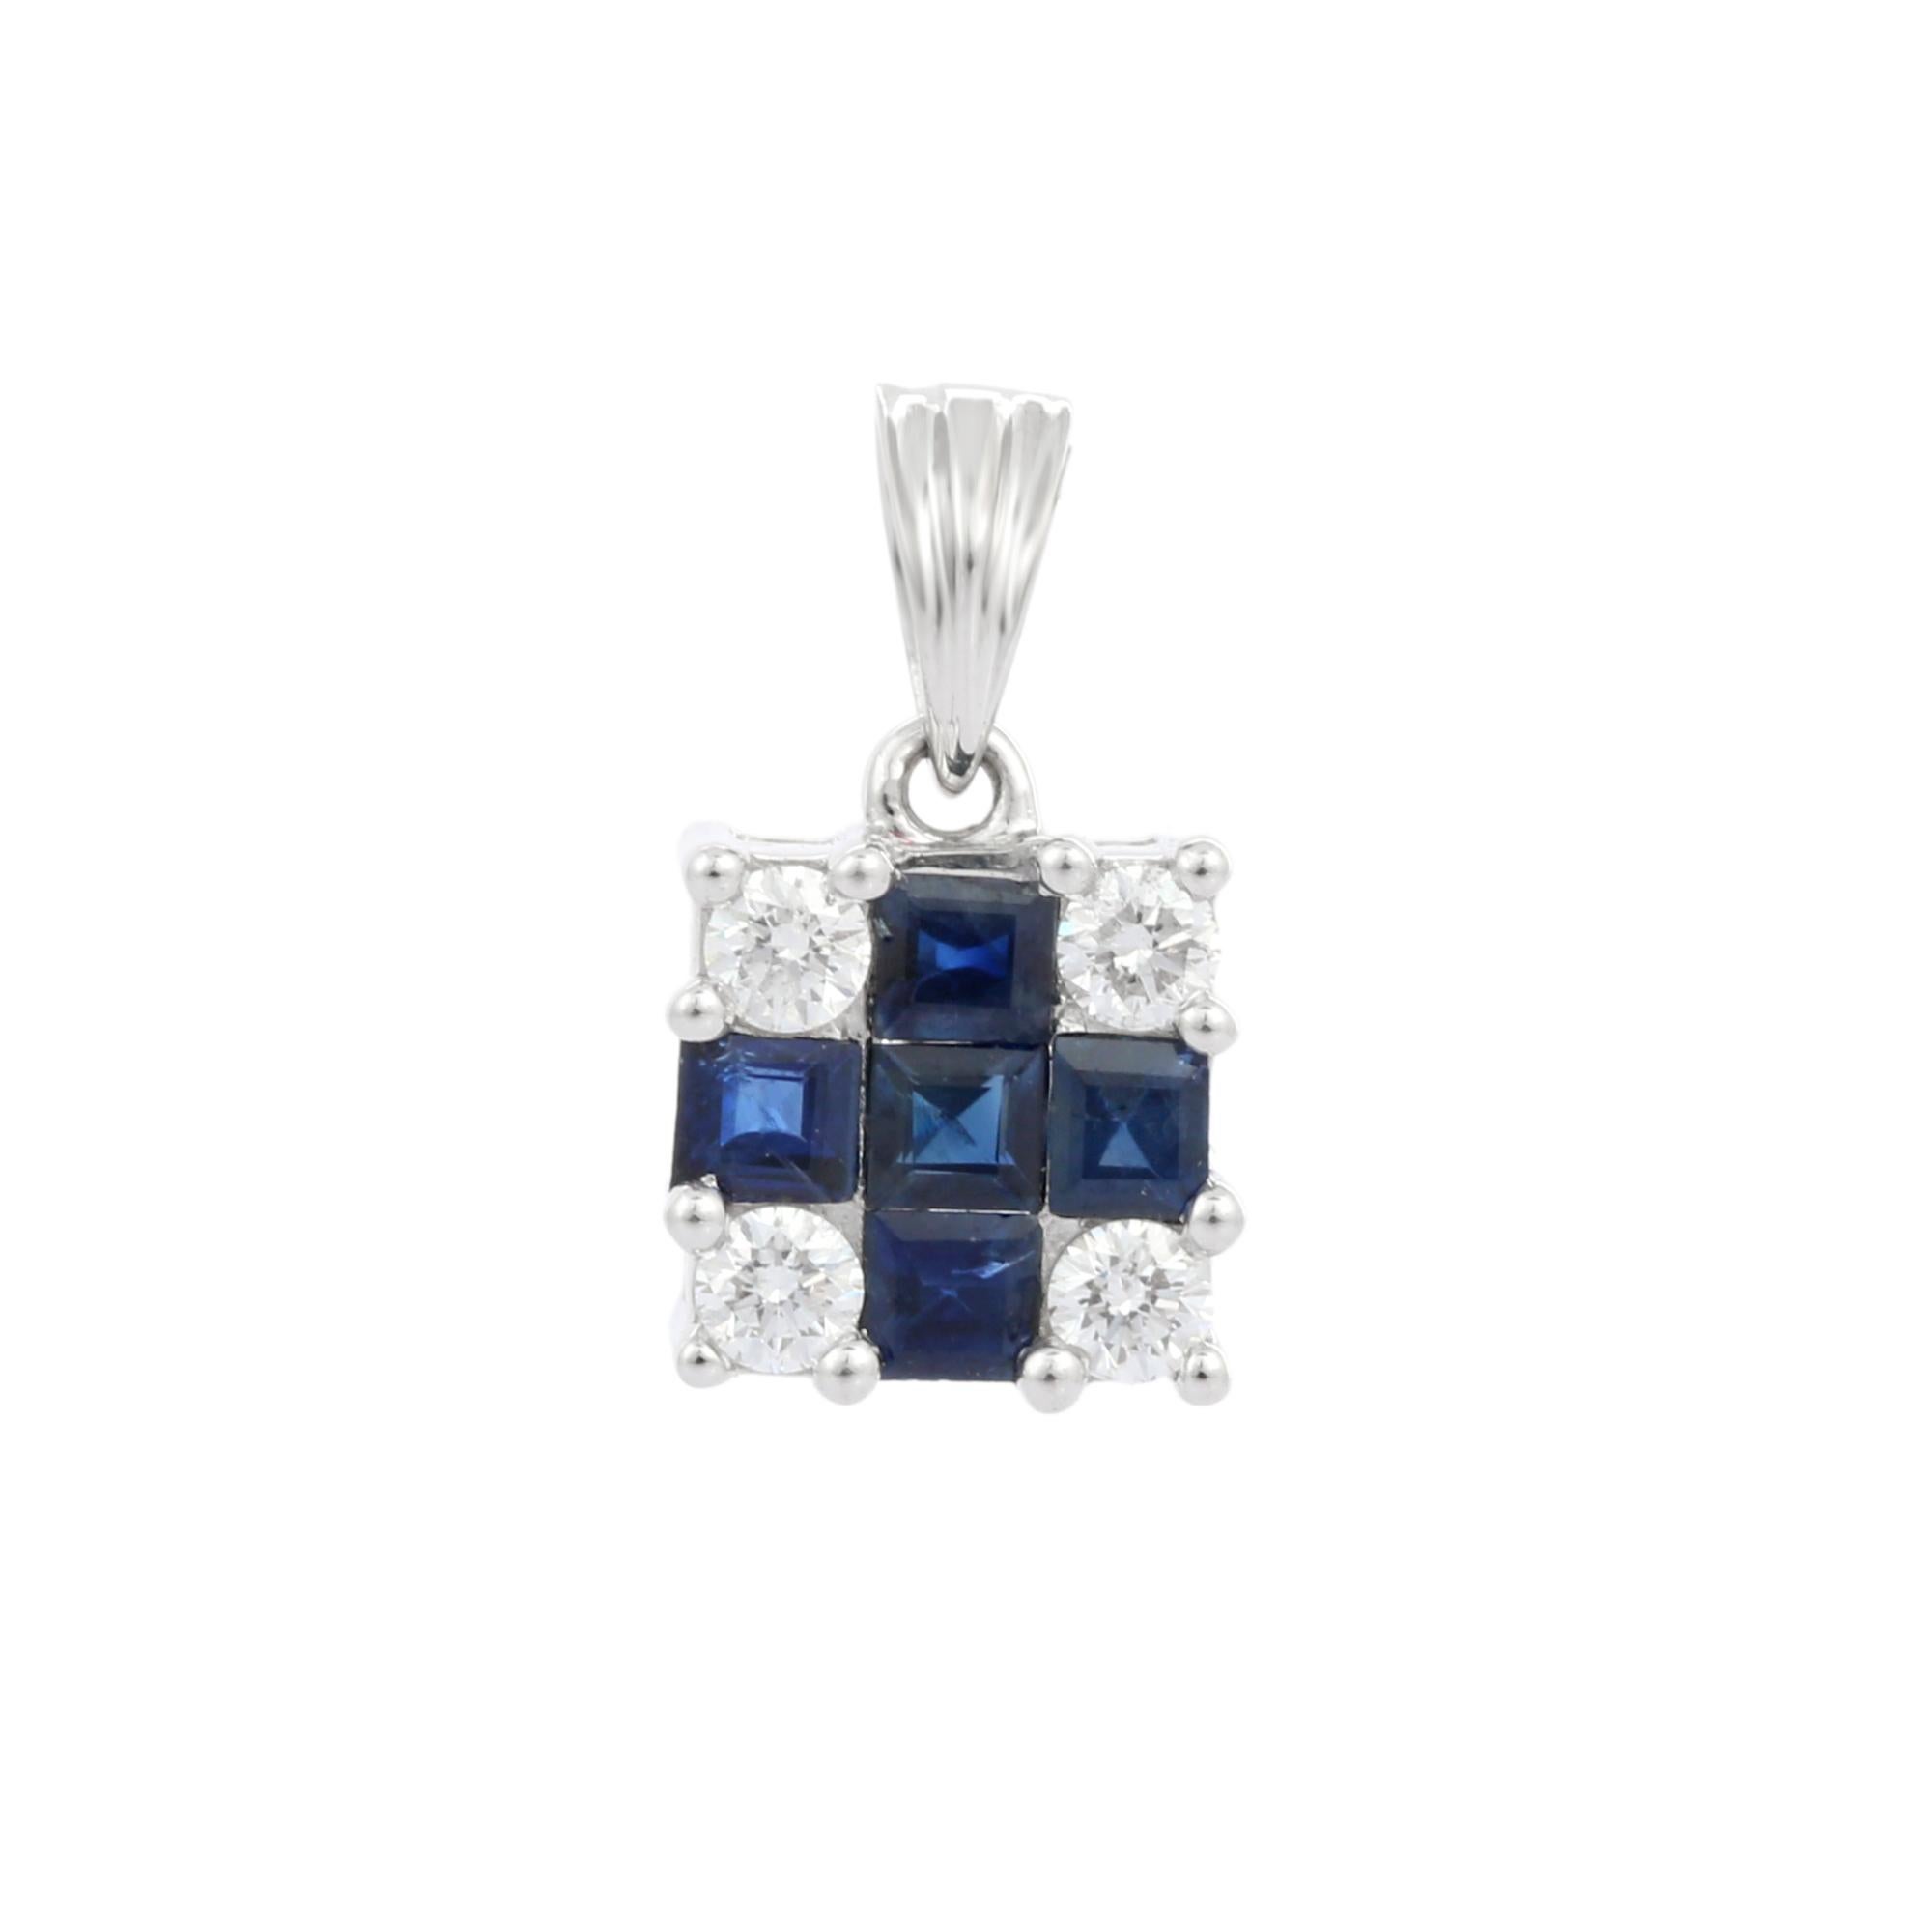 Natural Blue Sapphire and Diamond pendant in 18K Gold. It has square cut sapphires studded with diamonds that completes your look with a decent touch. Pendants are used to wear or gifted to represent love and promises. It's an attractive jewelry